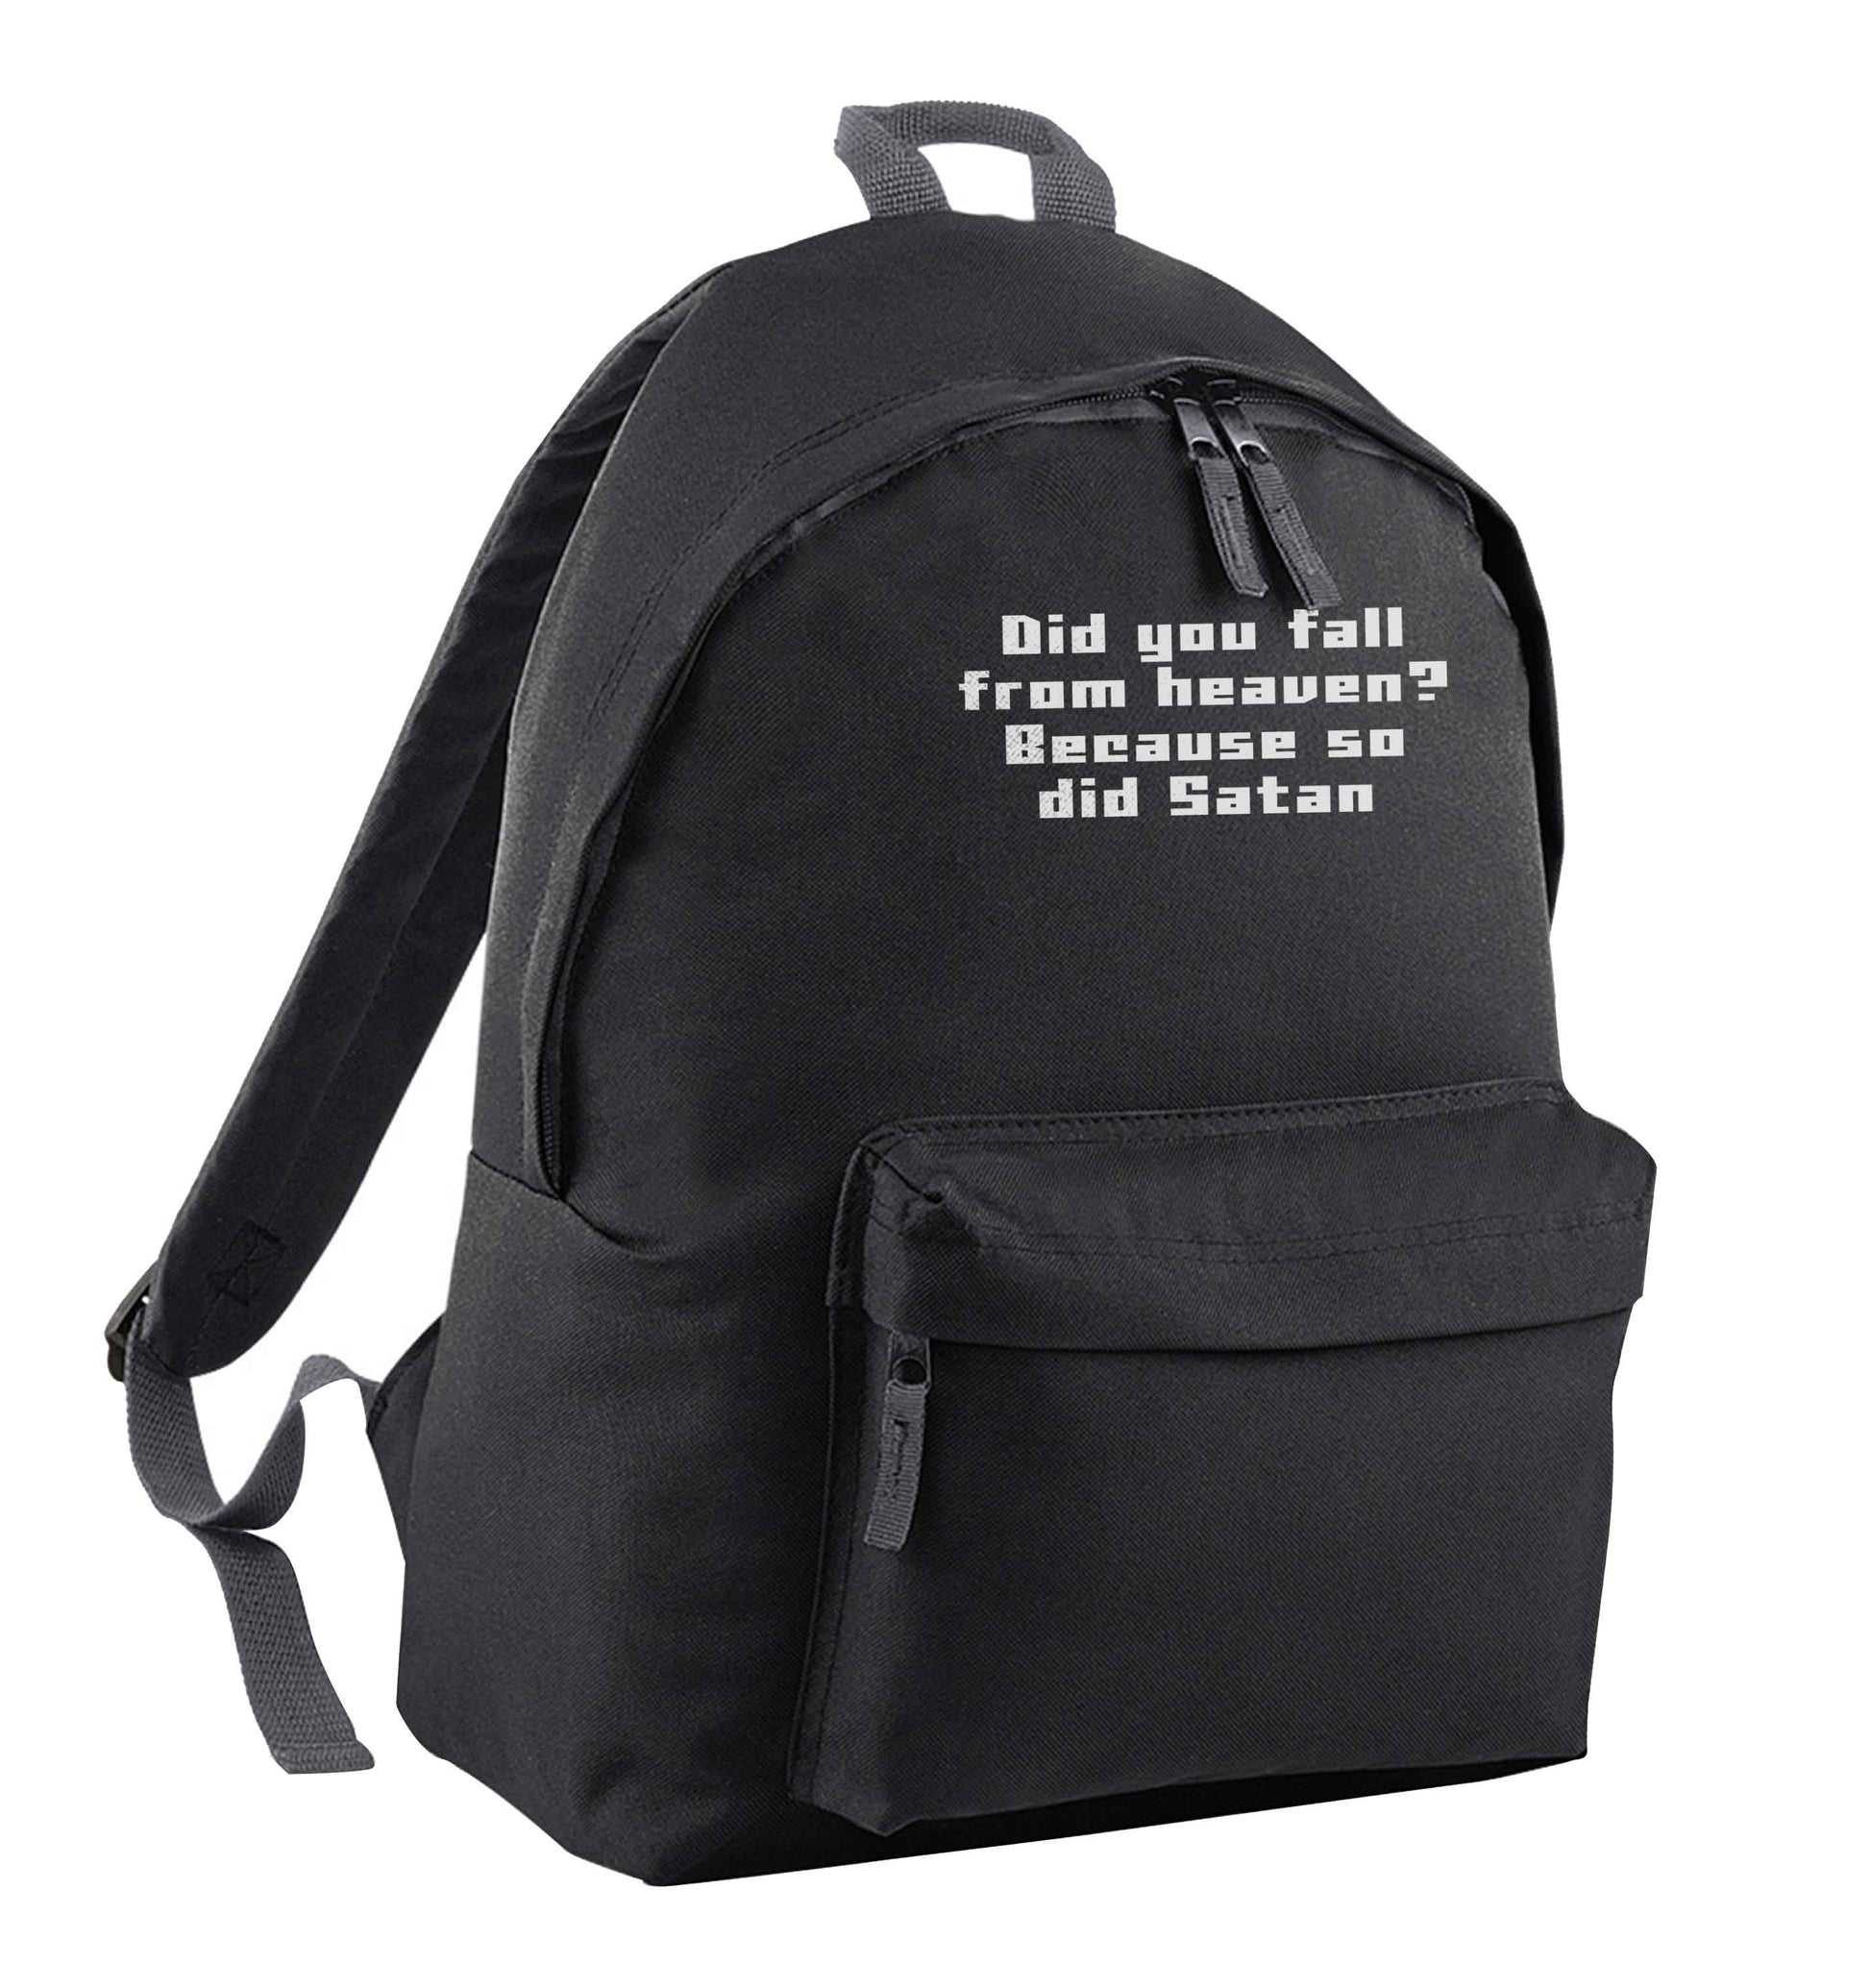 Did you fall from Heaven because so did Satan black adults backpack